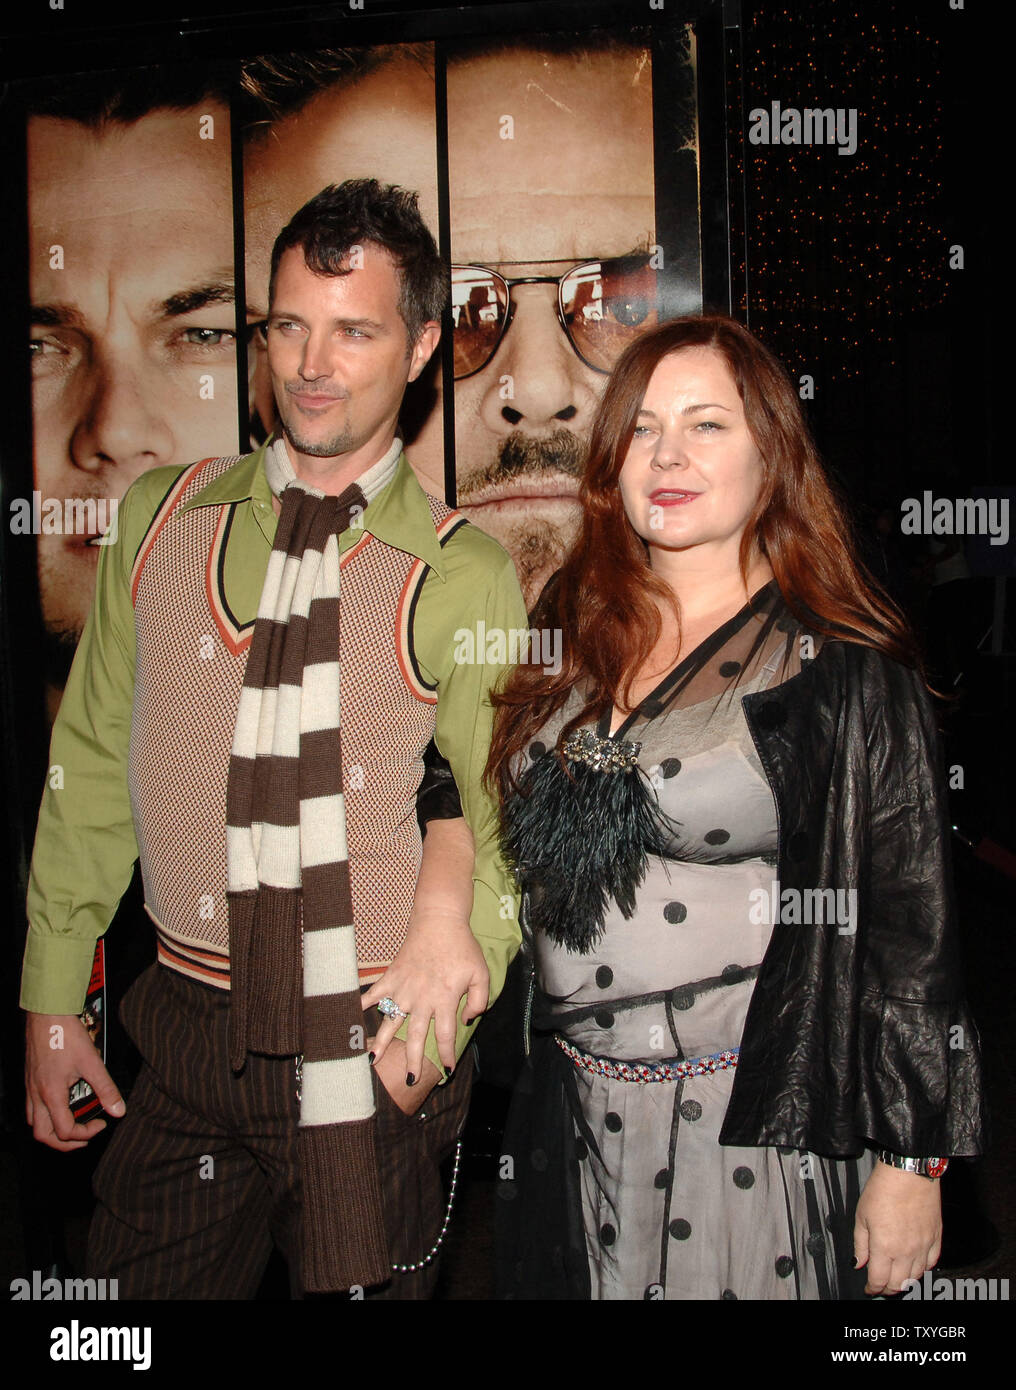 Fashion designer Jennifer Nicholson, daughter of cast member Jack Nicholson, and a guest arrive at an industry screening of 'The Departed' at the Director's Guild of America in Los Angeles, California on October 5, 2006. (UPI Photo/Jim Ruymen) Stock Photo